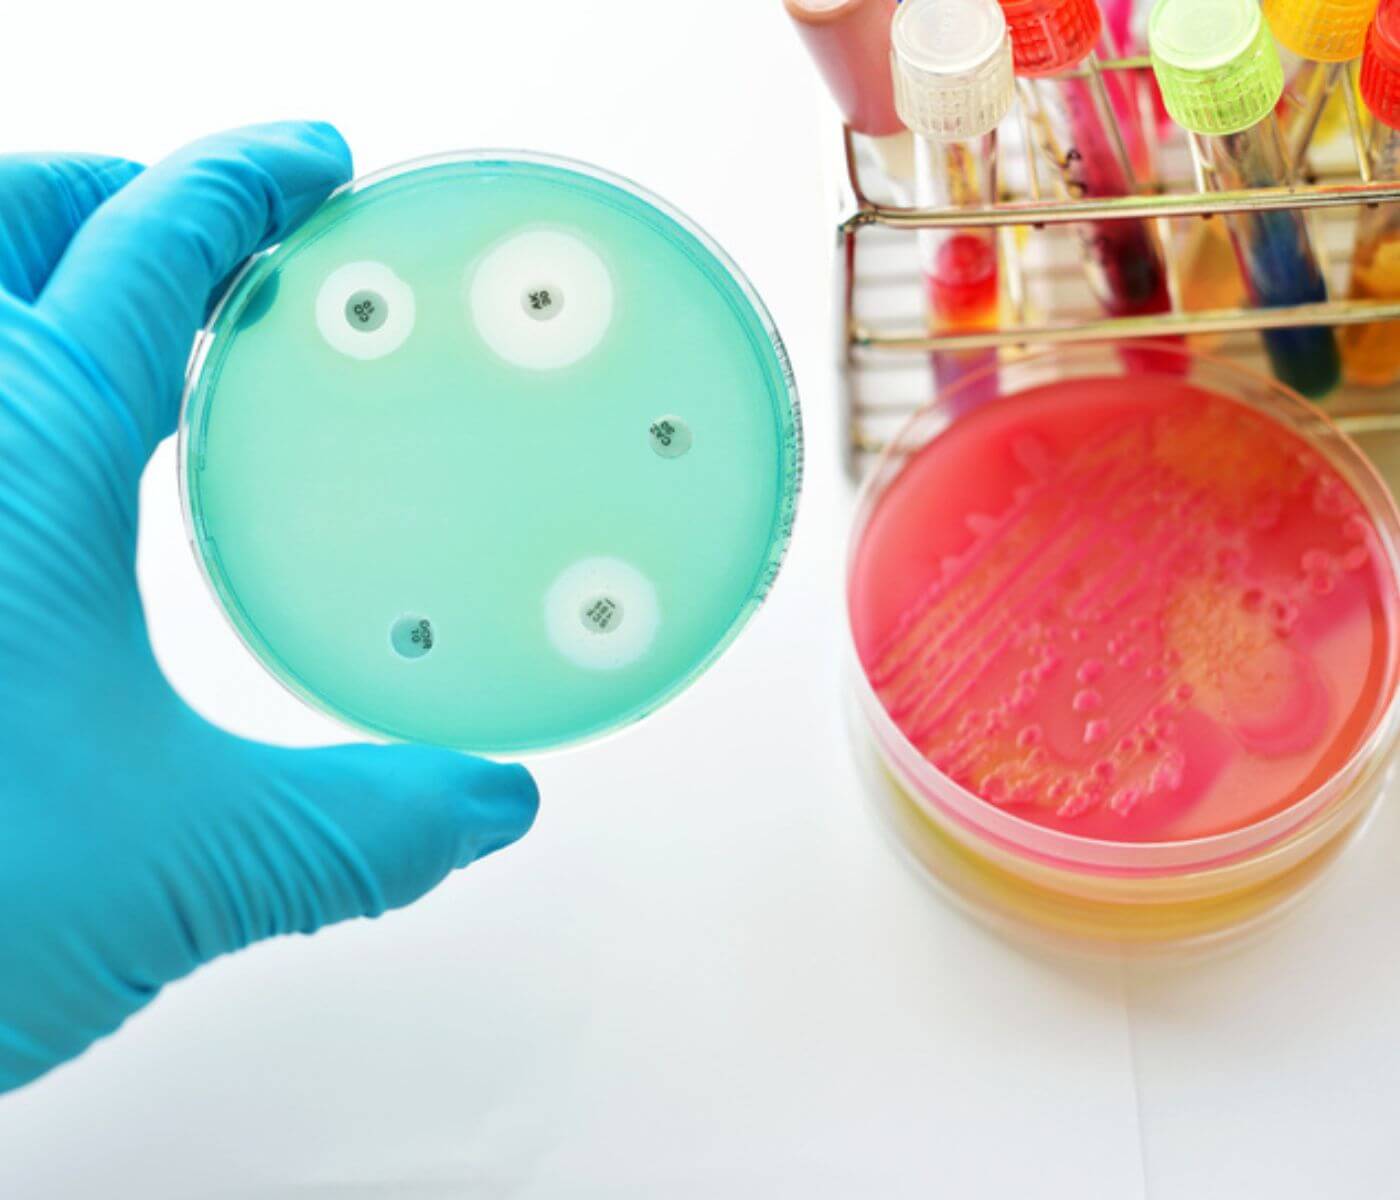 Bacteria resistant to highly used antibiotics still frequent in humans and animals